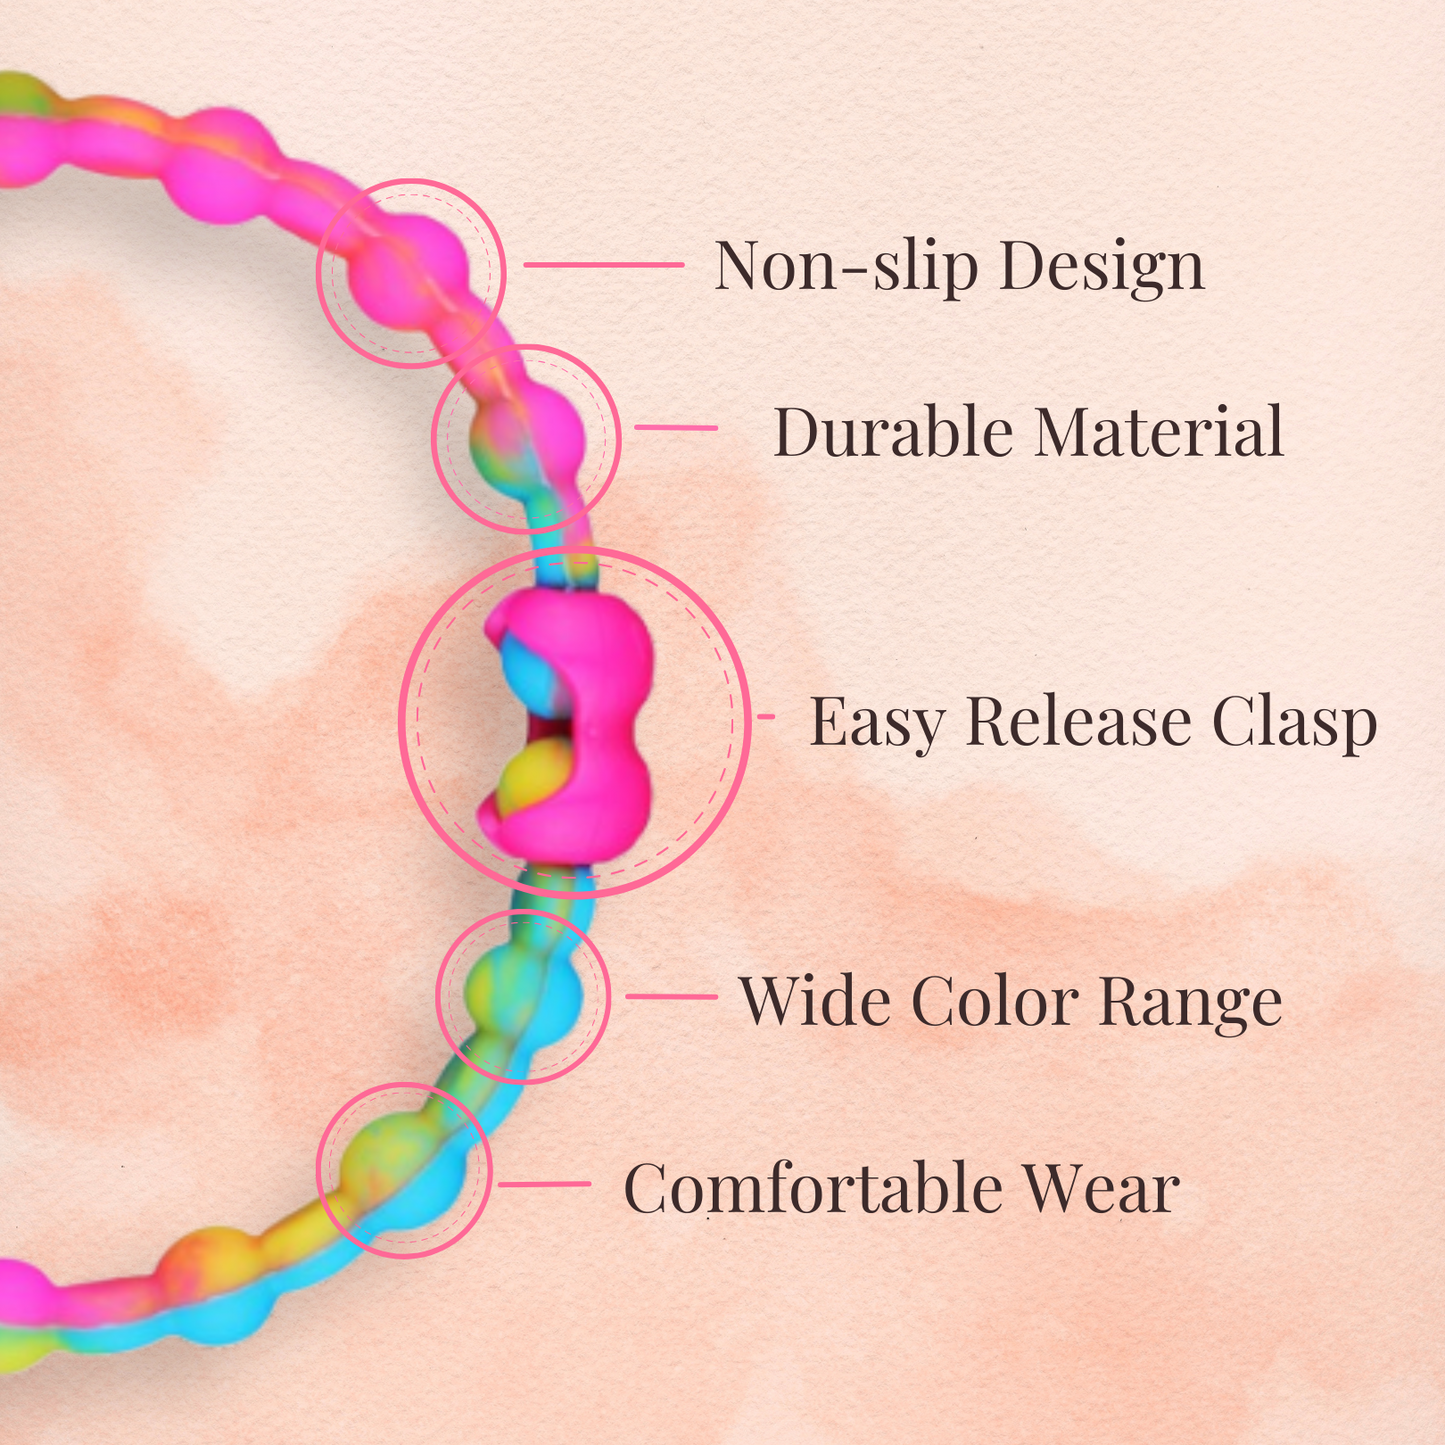 Twilight Mirage Pack PRO Hair Ties (4-Pack): Where Earth Meets Sky in Every Strand